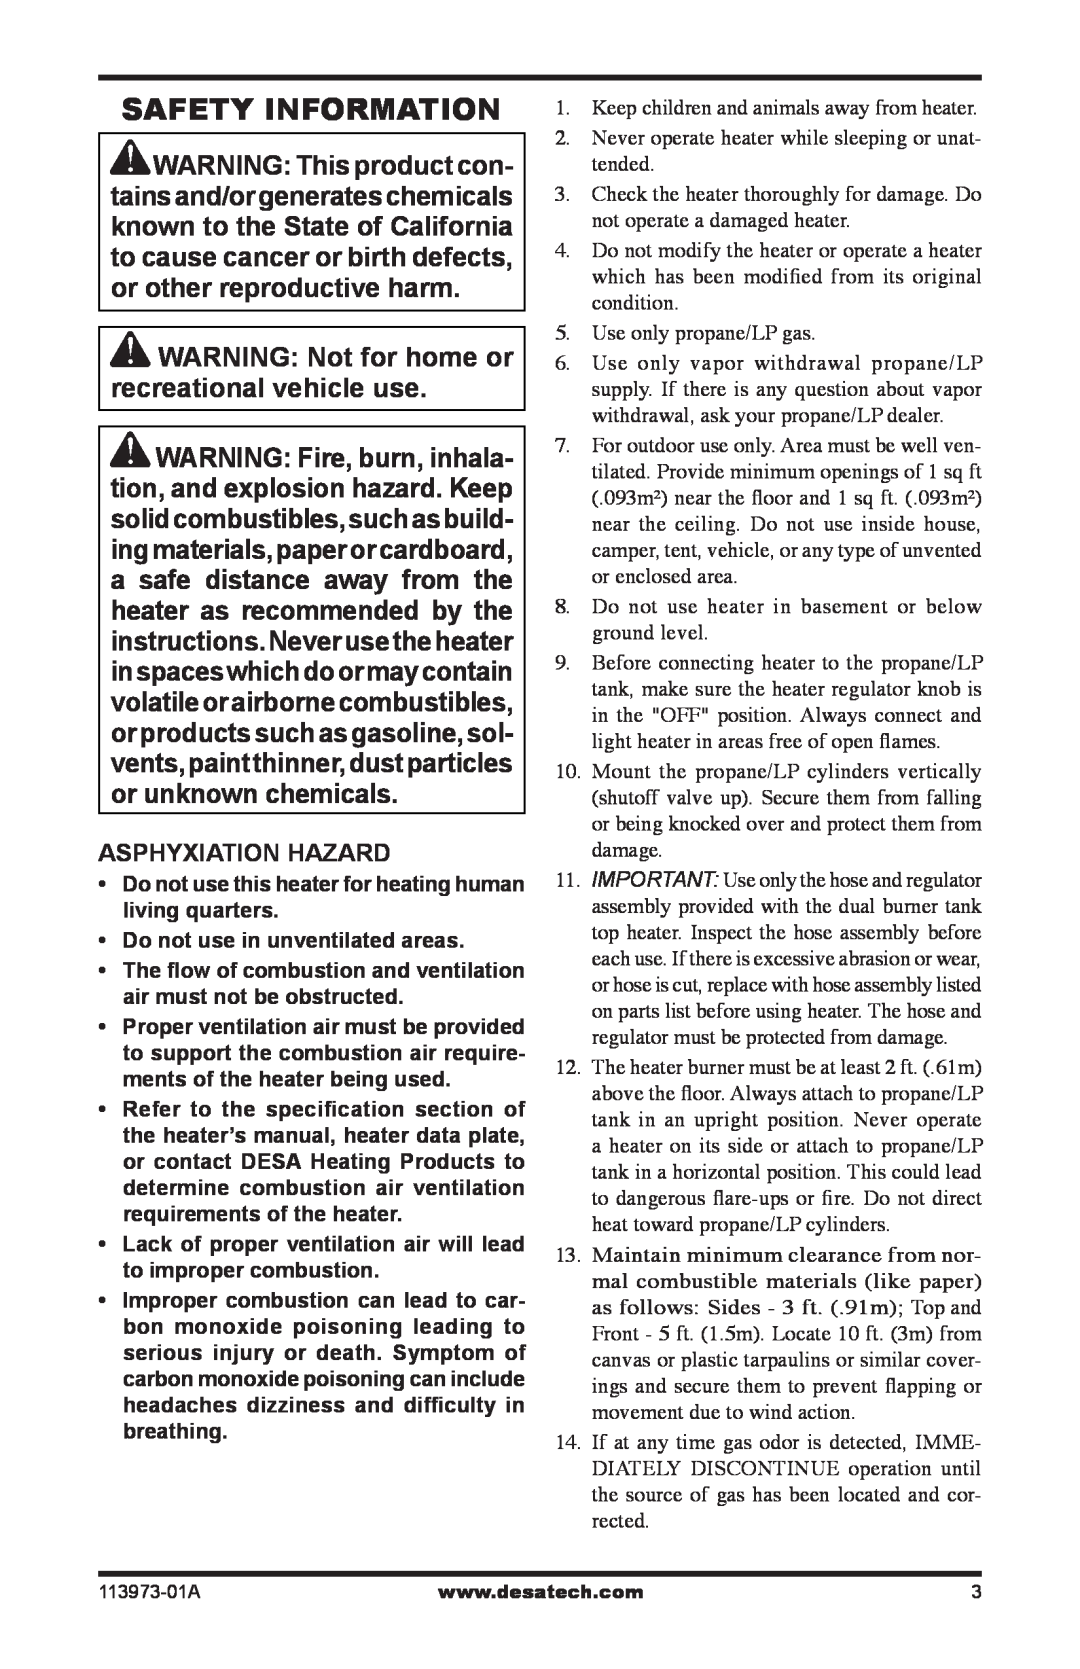 Desa TT30 10, TT15A 10, SPC-15R Safety Information, WARNING Not for home or recreational vehicle use, Asphyxiation Hazard 